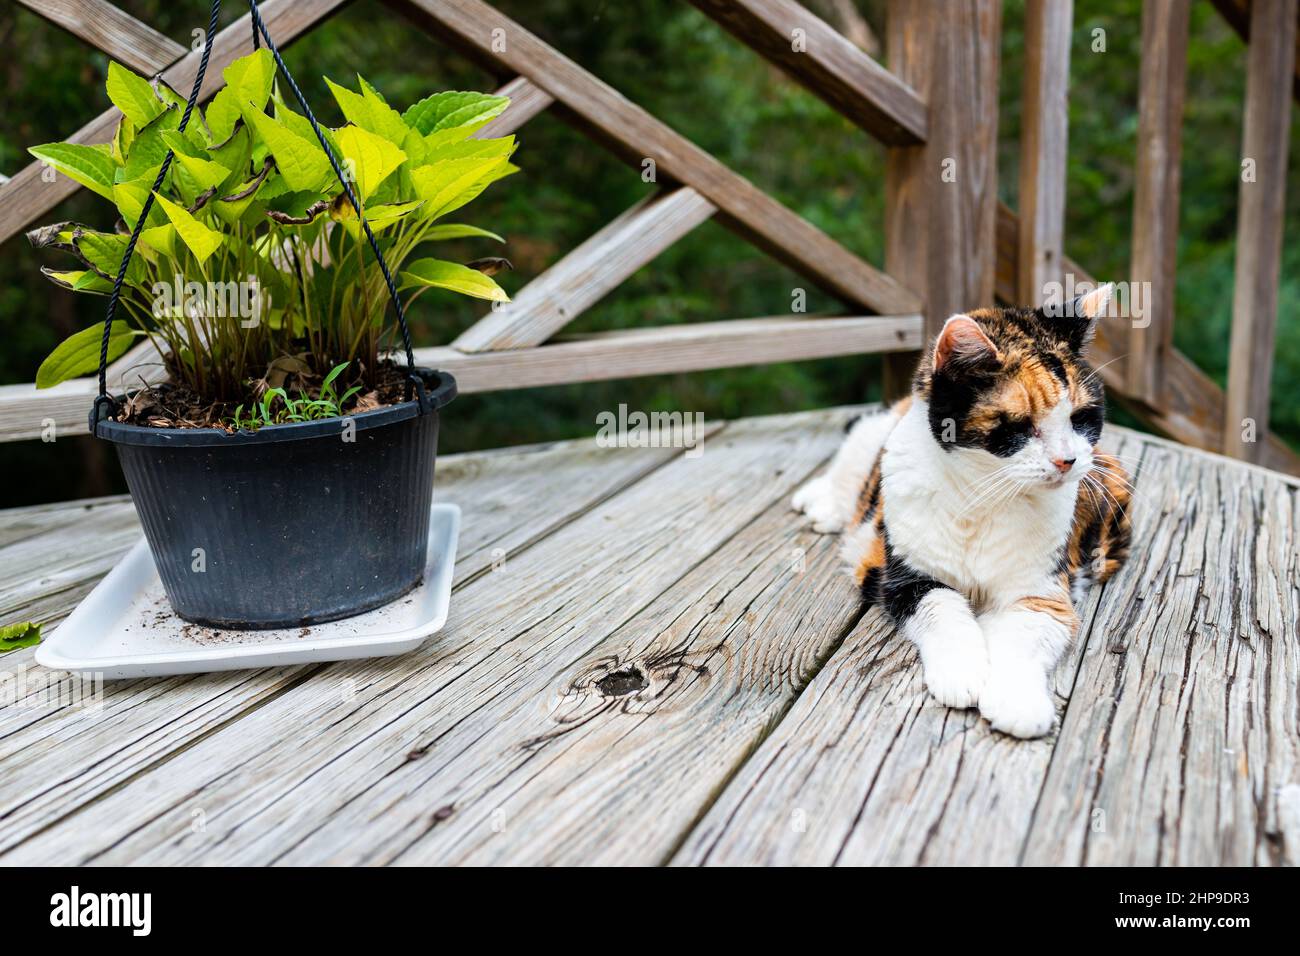 Old underweight senior calico cat lying down on wood deck patio in outdoor garden of house on floor by Purple Coneflower potted plant green leaves Stock Photo